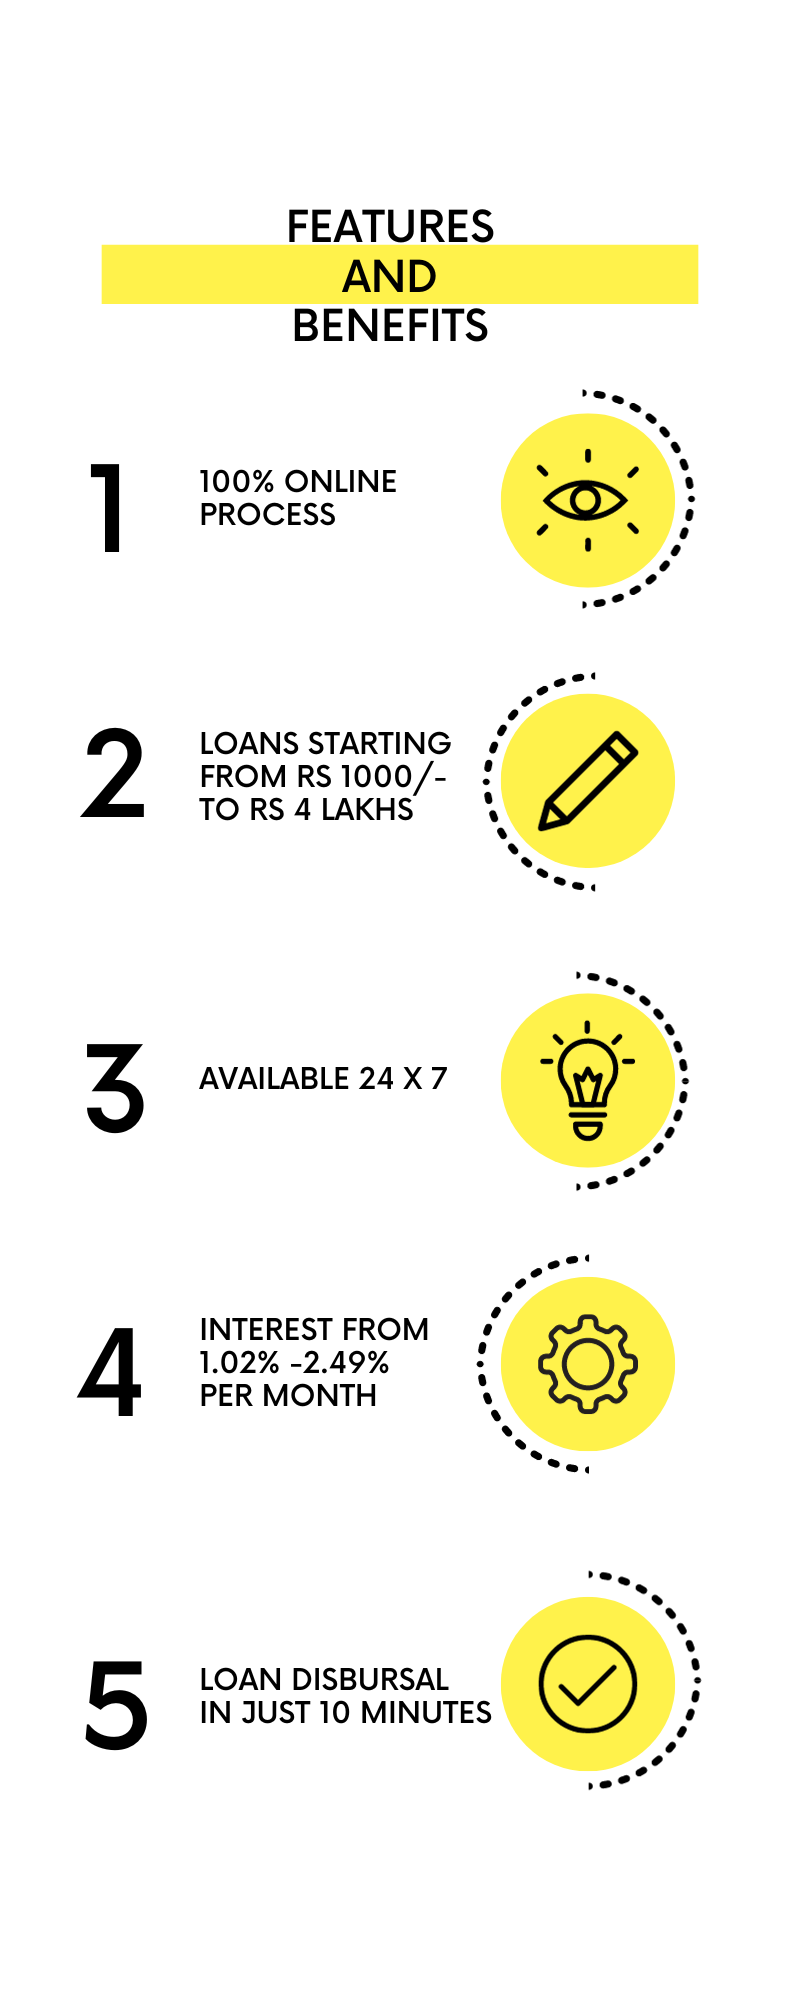 KREDITBEE LOAN -FEATURES AND BENEFITS